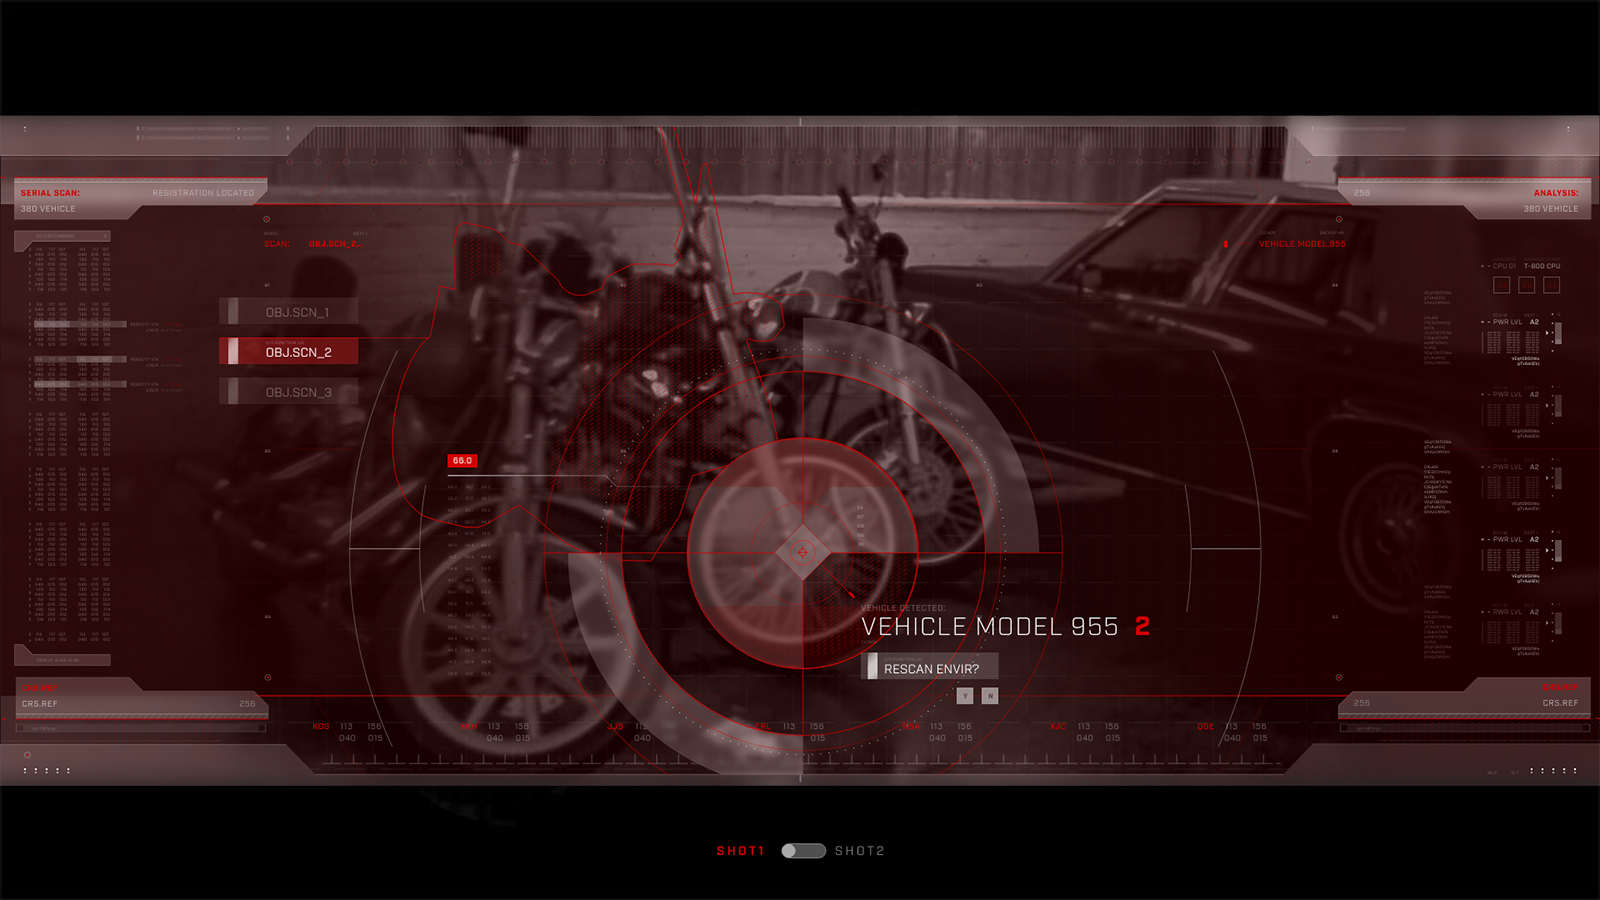 terminator 2 ux redesigned with adobe xd s1 select2 copy